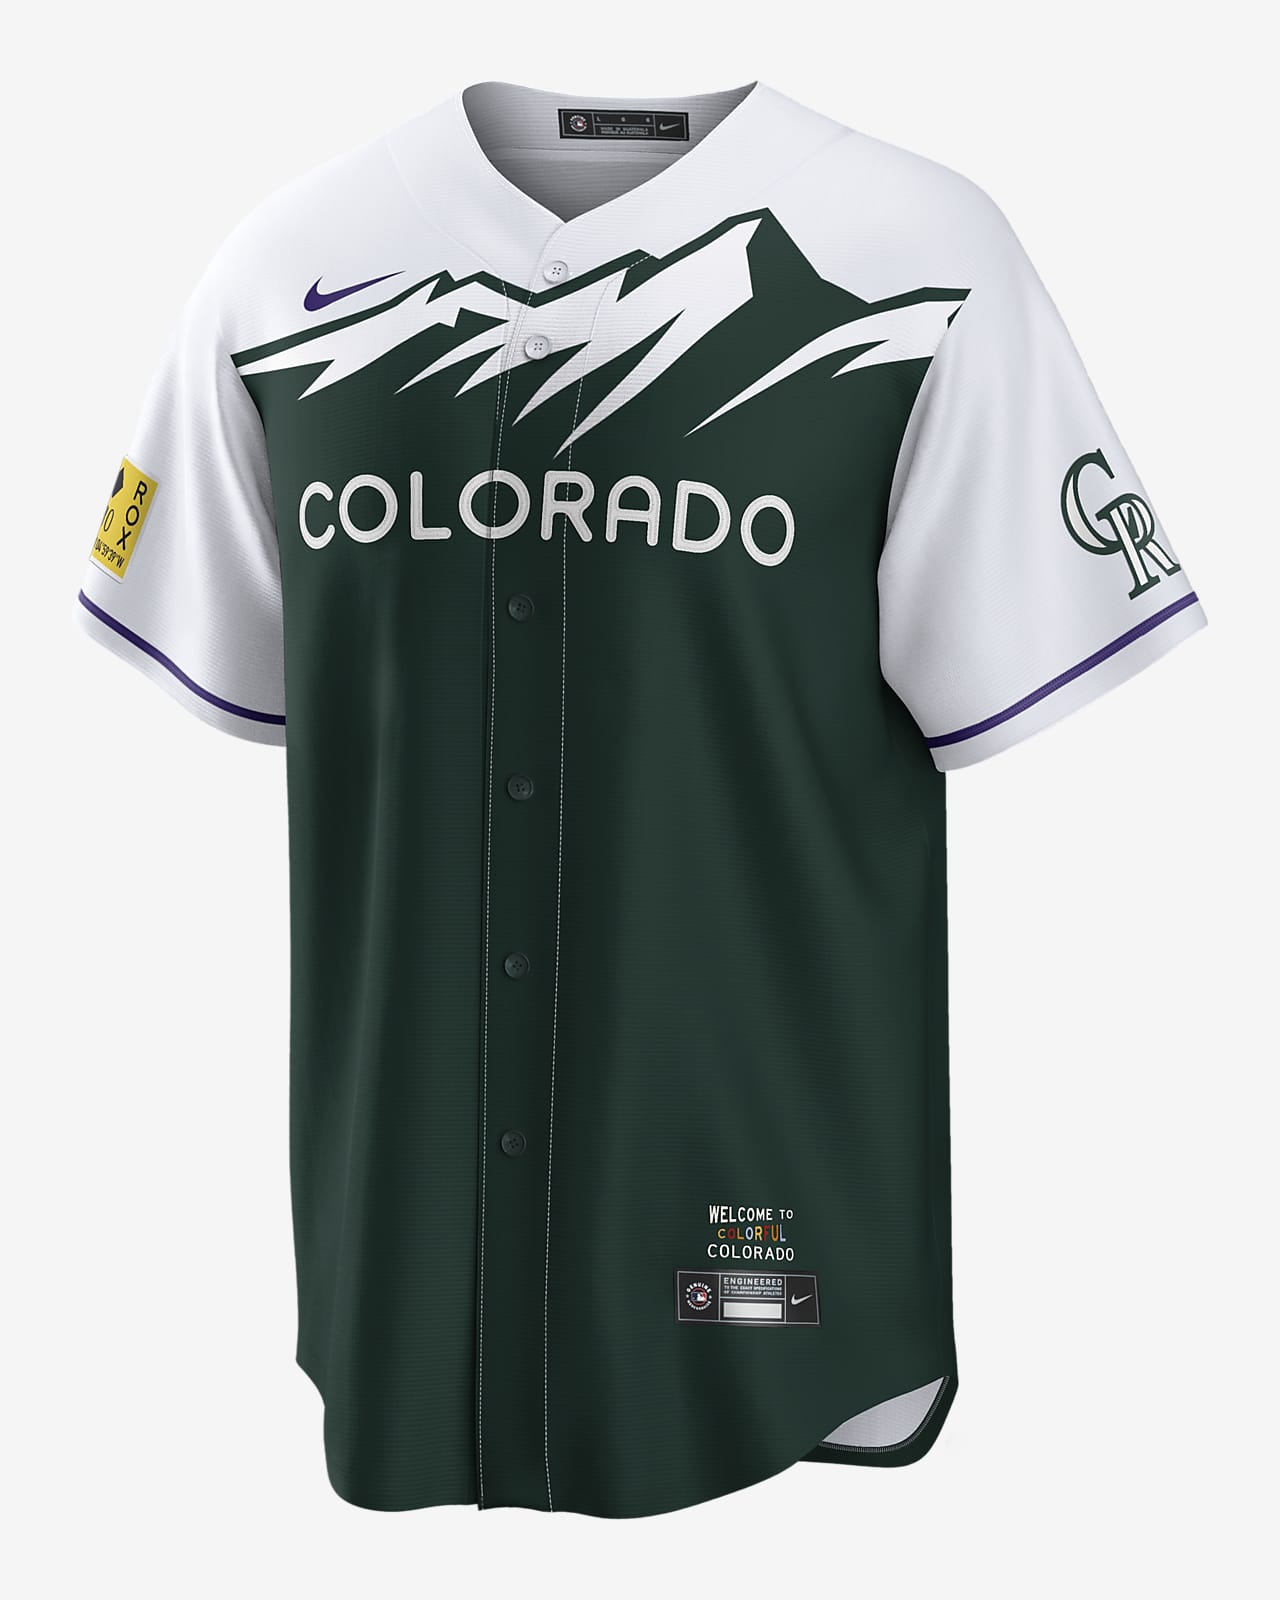 mlb city connect jerseys 2023 release date